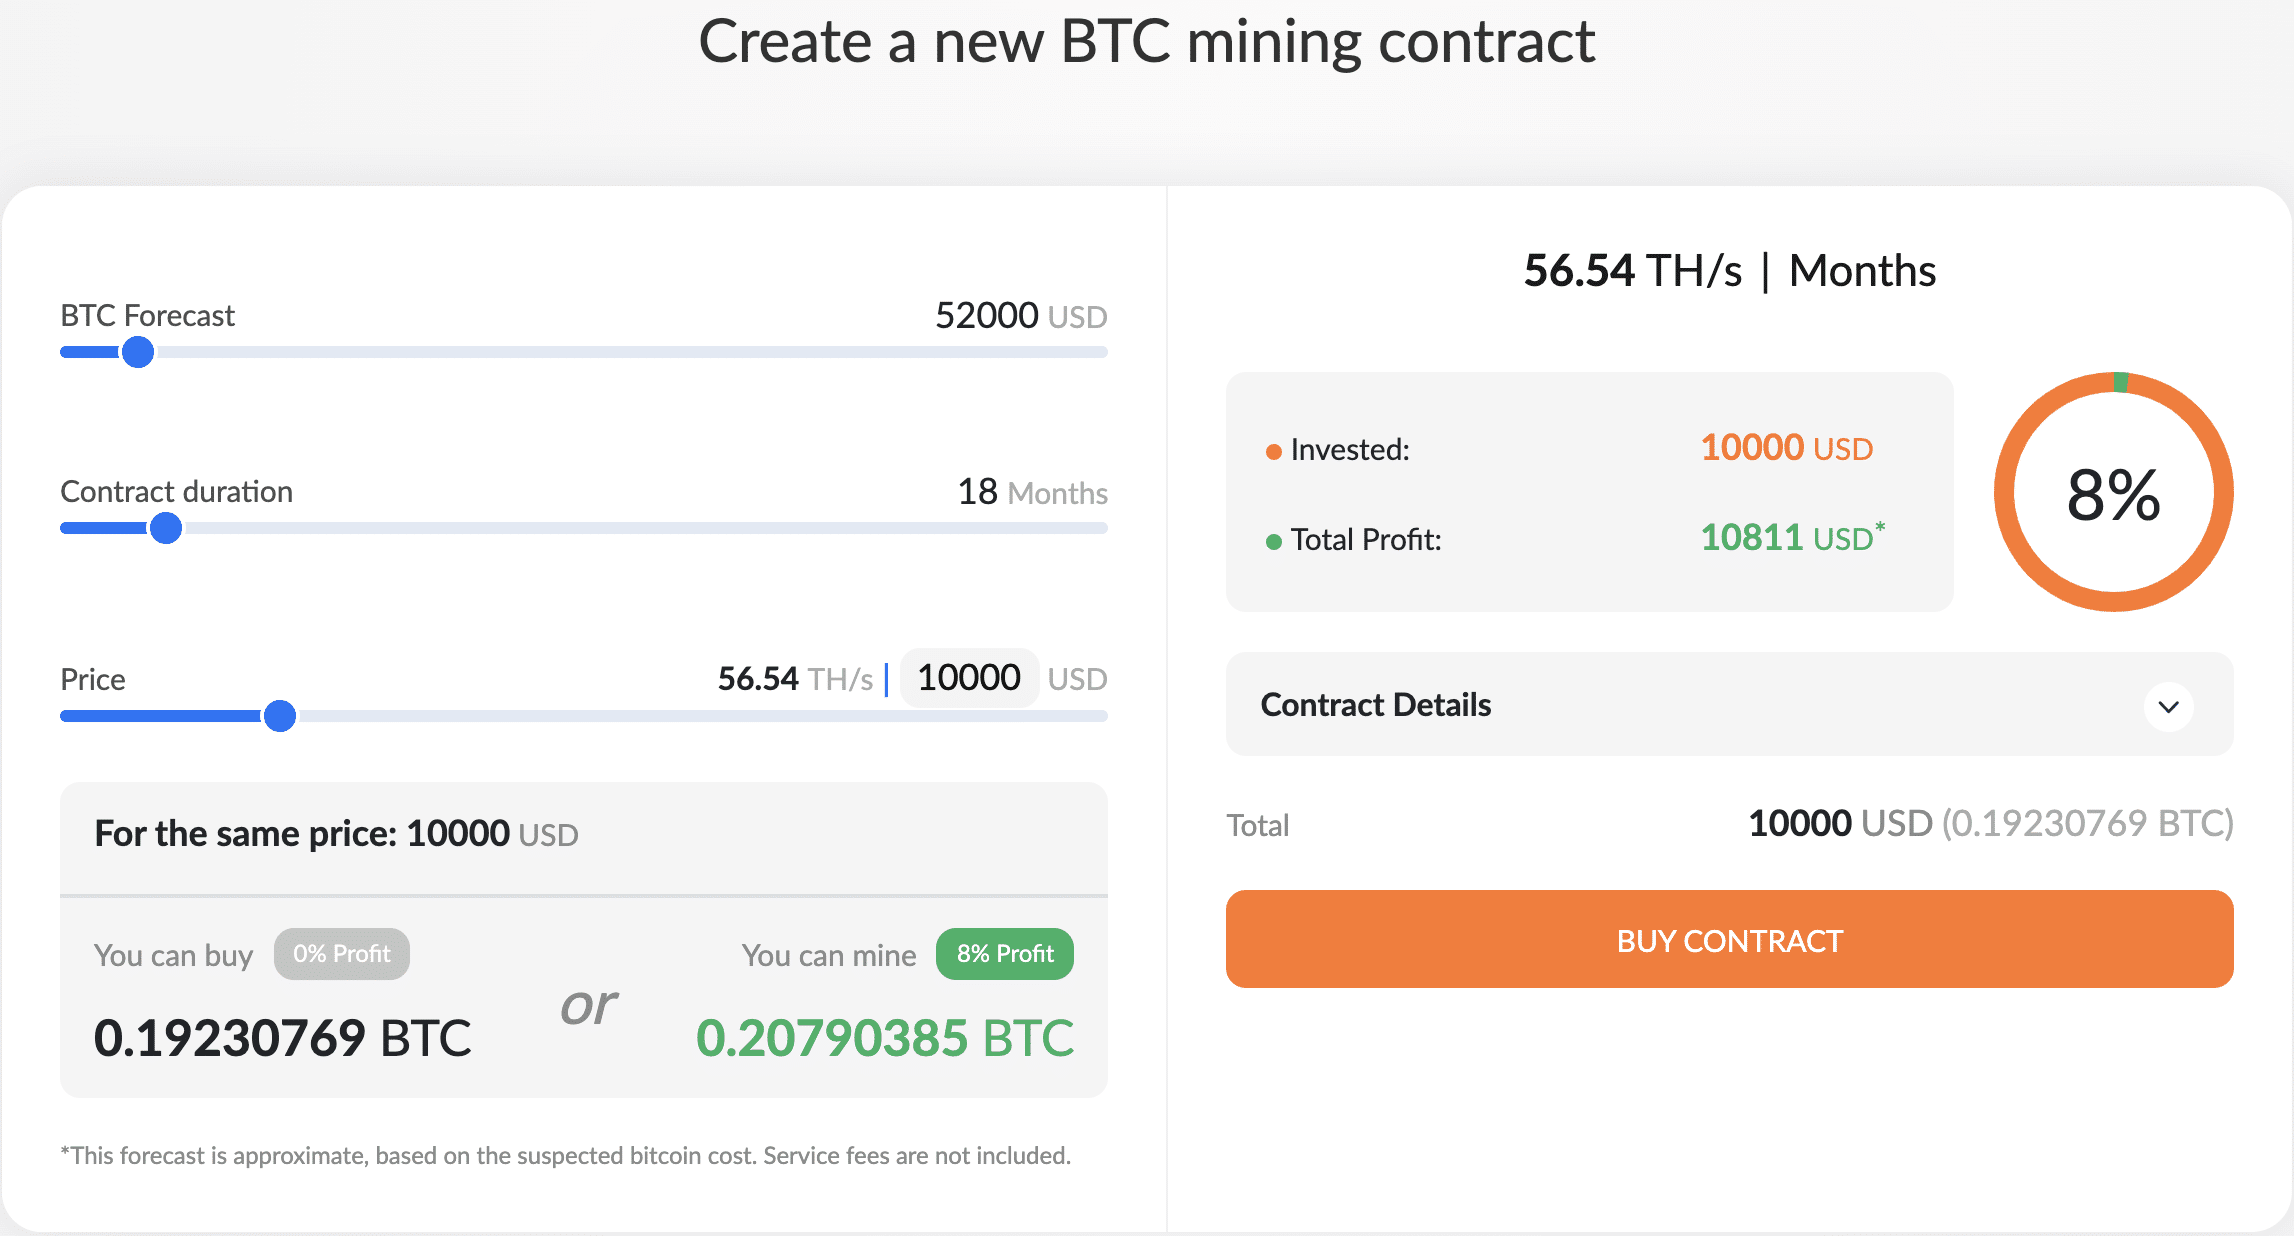 ECOS Mining contract types